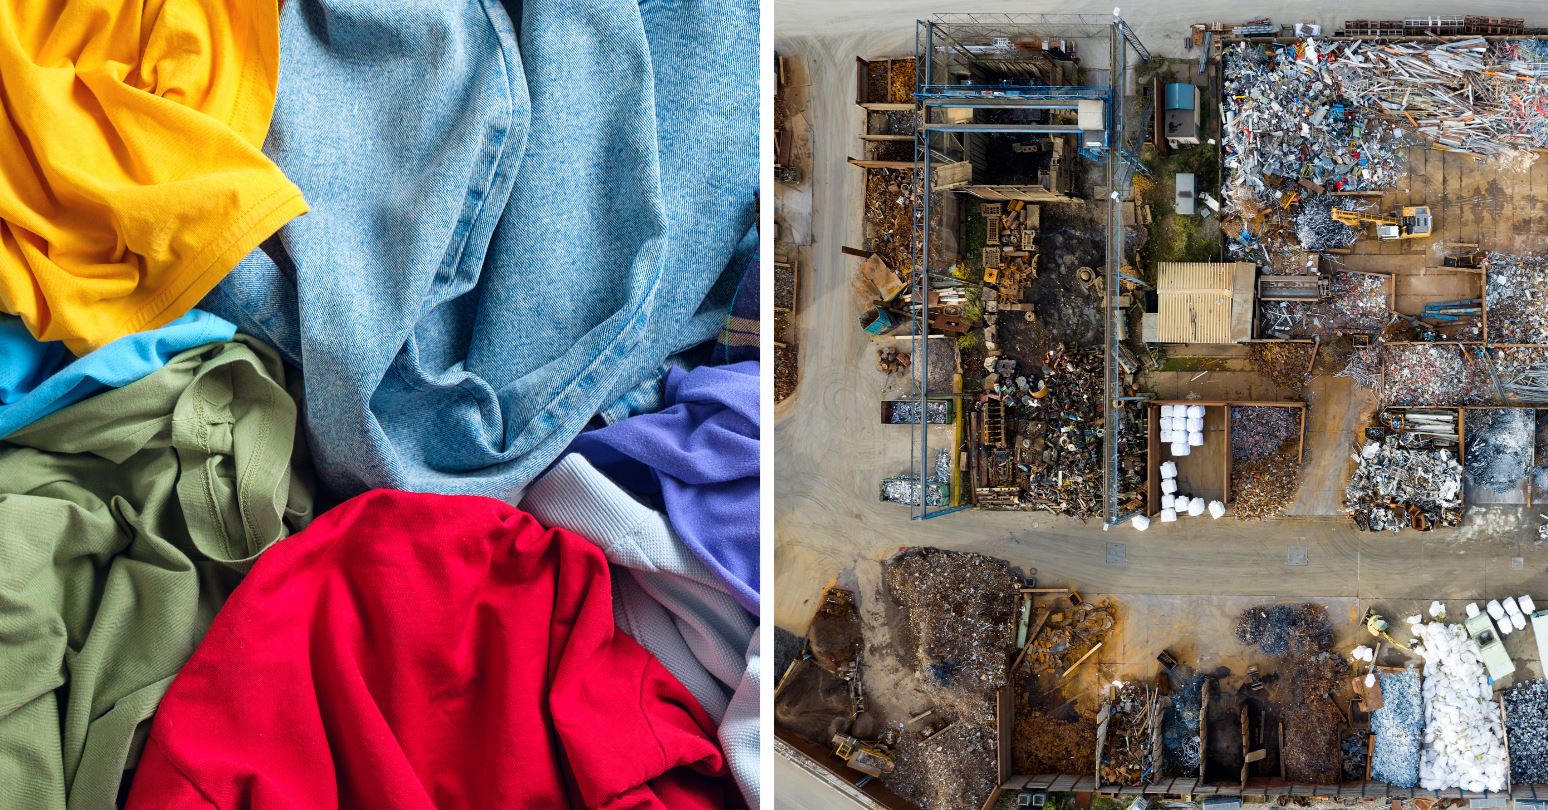 Photos of bunched up clothing and sorted construction waste, side by side